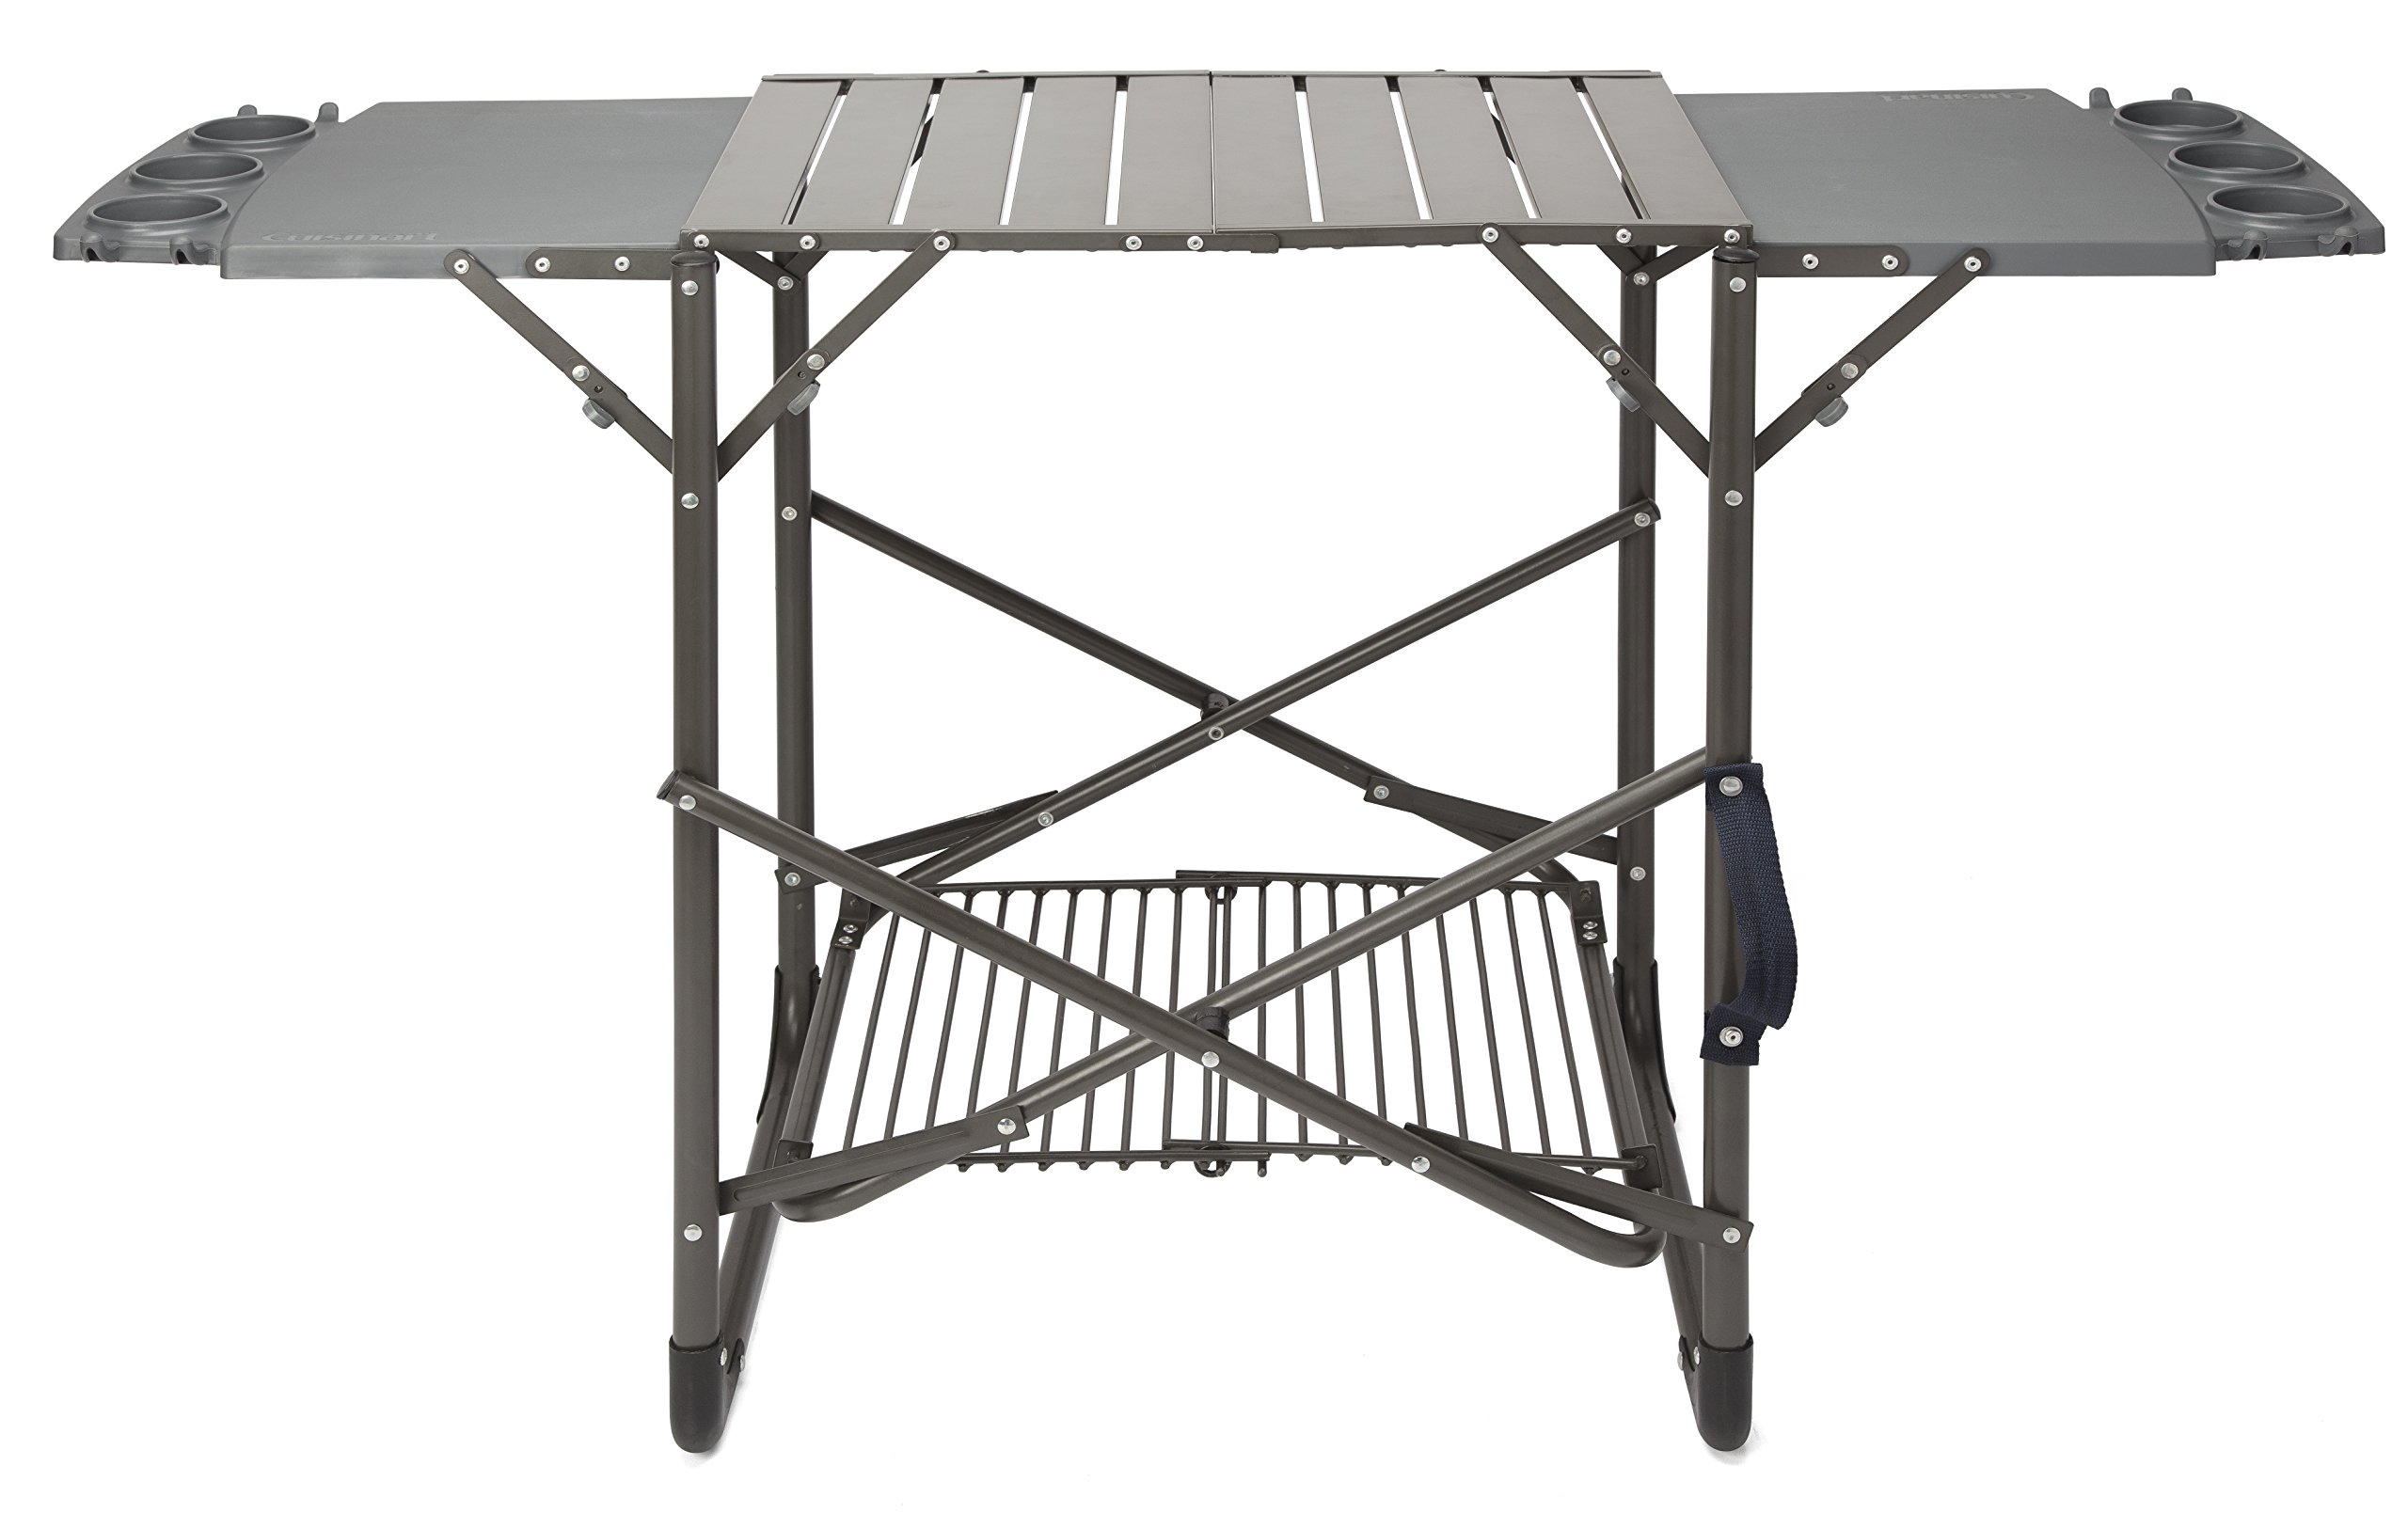 Cuisinart Take Along Portable Aluminum Grill Stand w/ Side Shelves (CFGS-222) $50.15 + Free Shipping